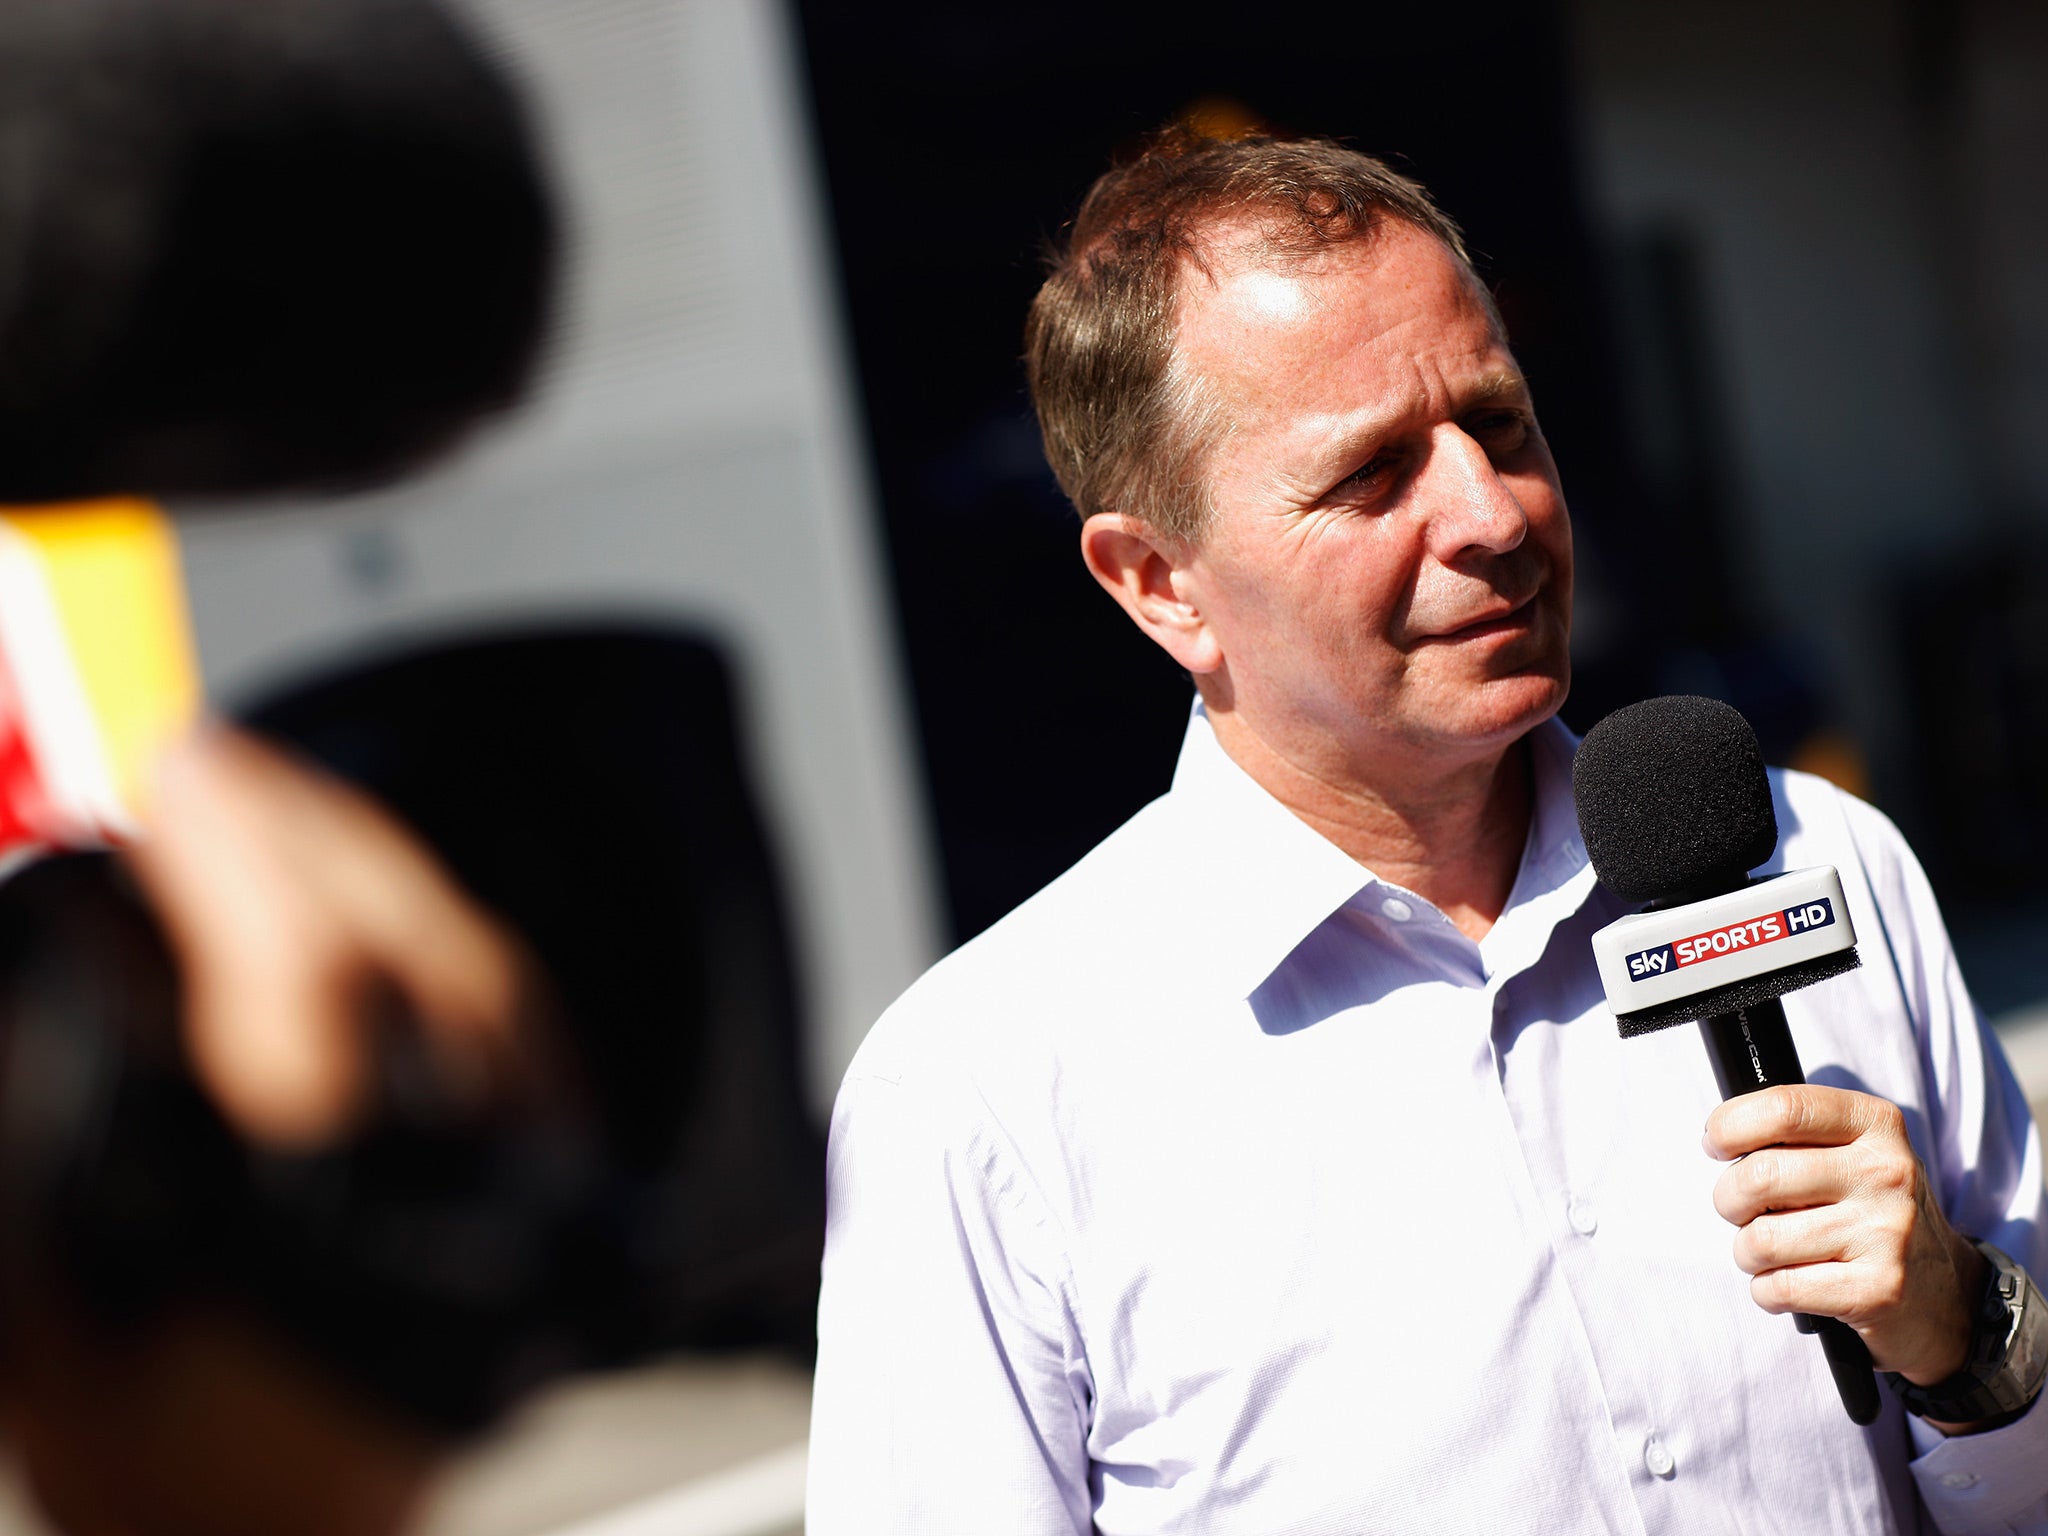 Martin Brundle was taken ill ahead of the British Grand Prix at Silverstone